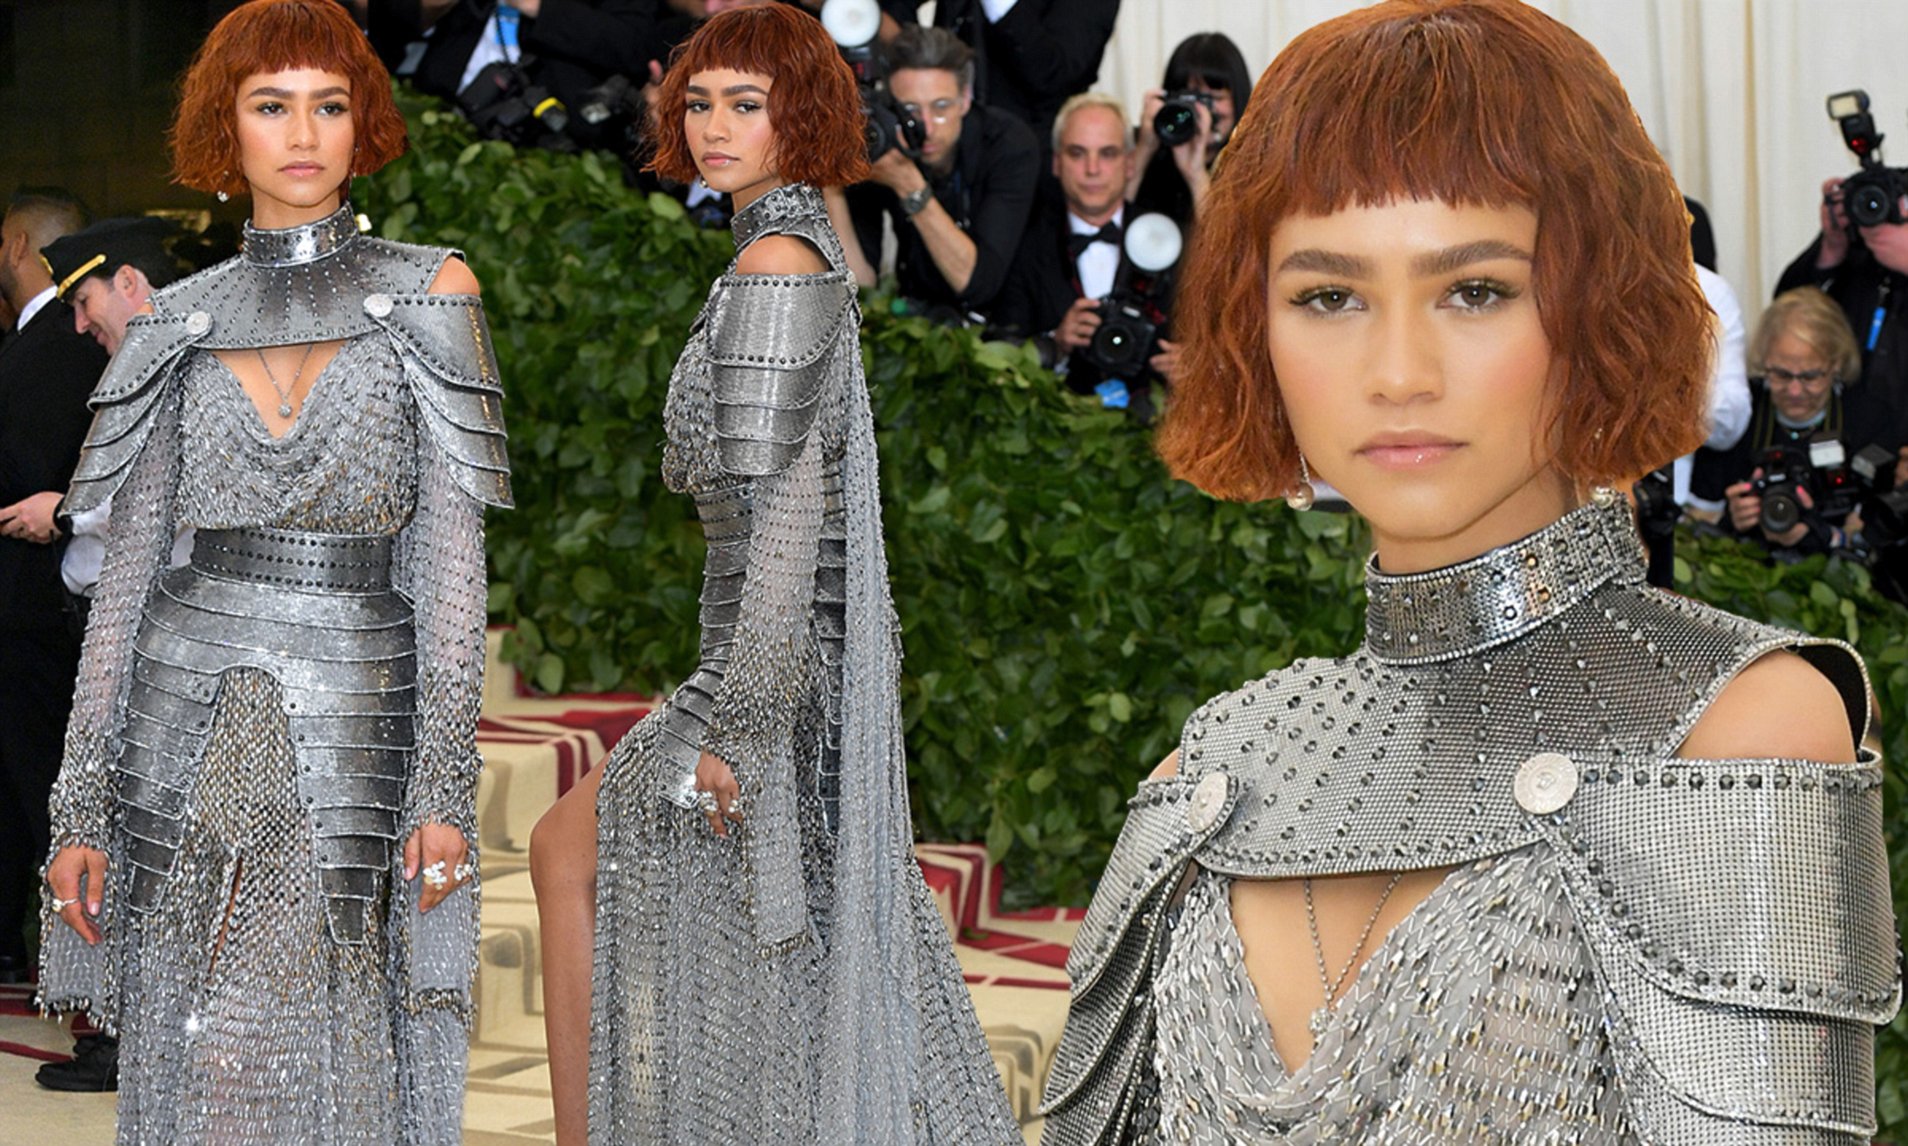 the actress zendaya in a gray chain mail dress on the steps of the met gala